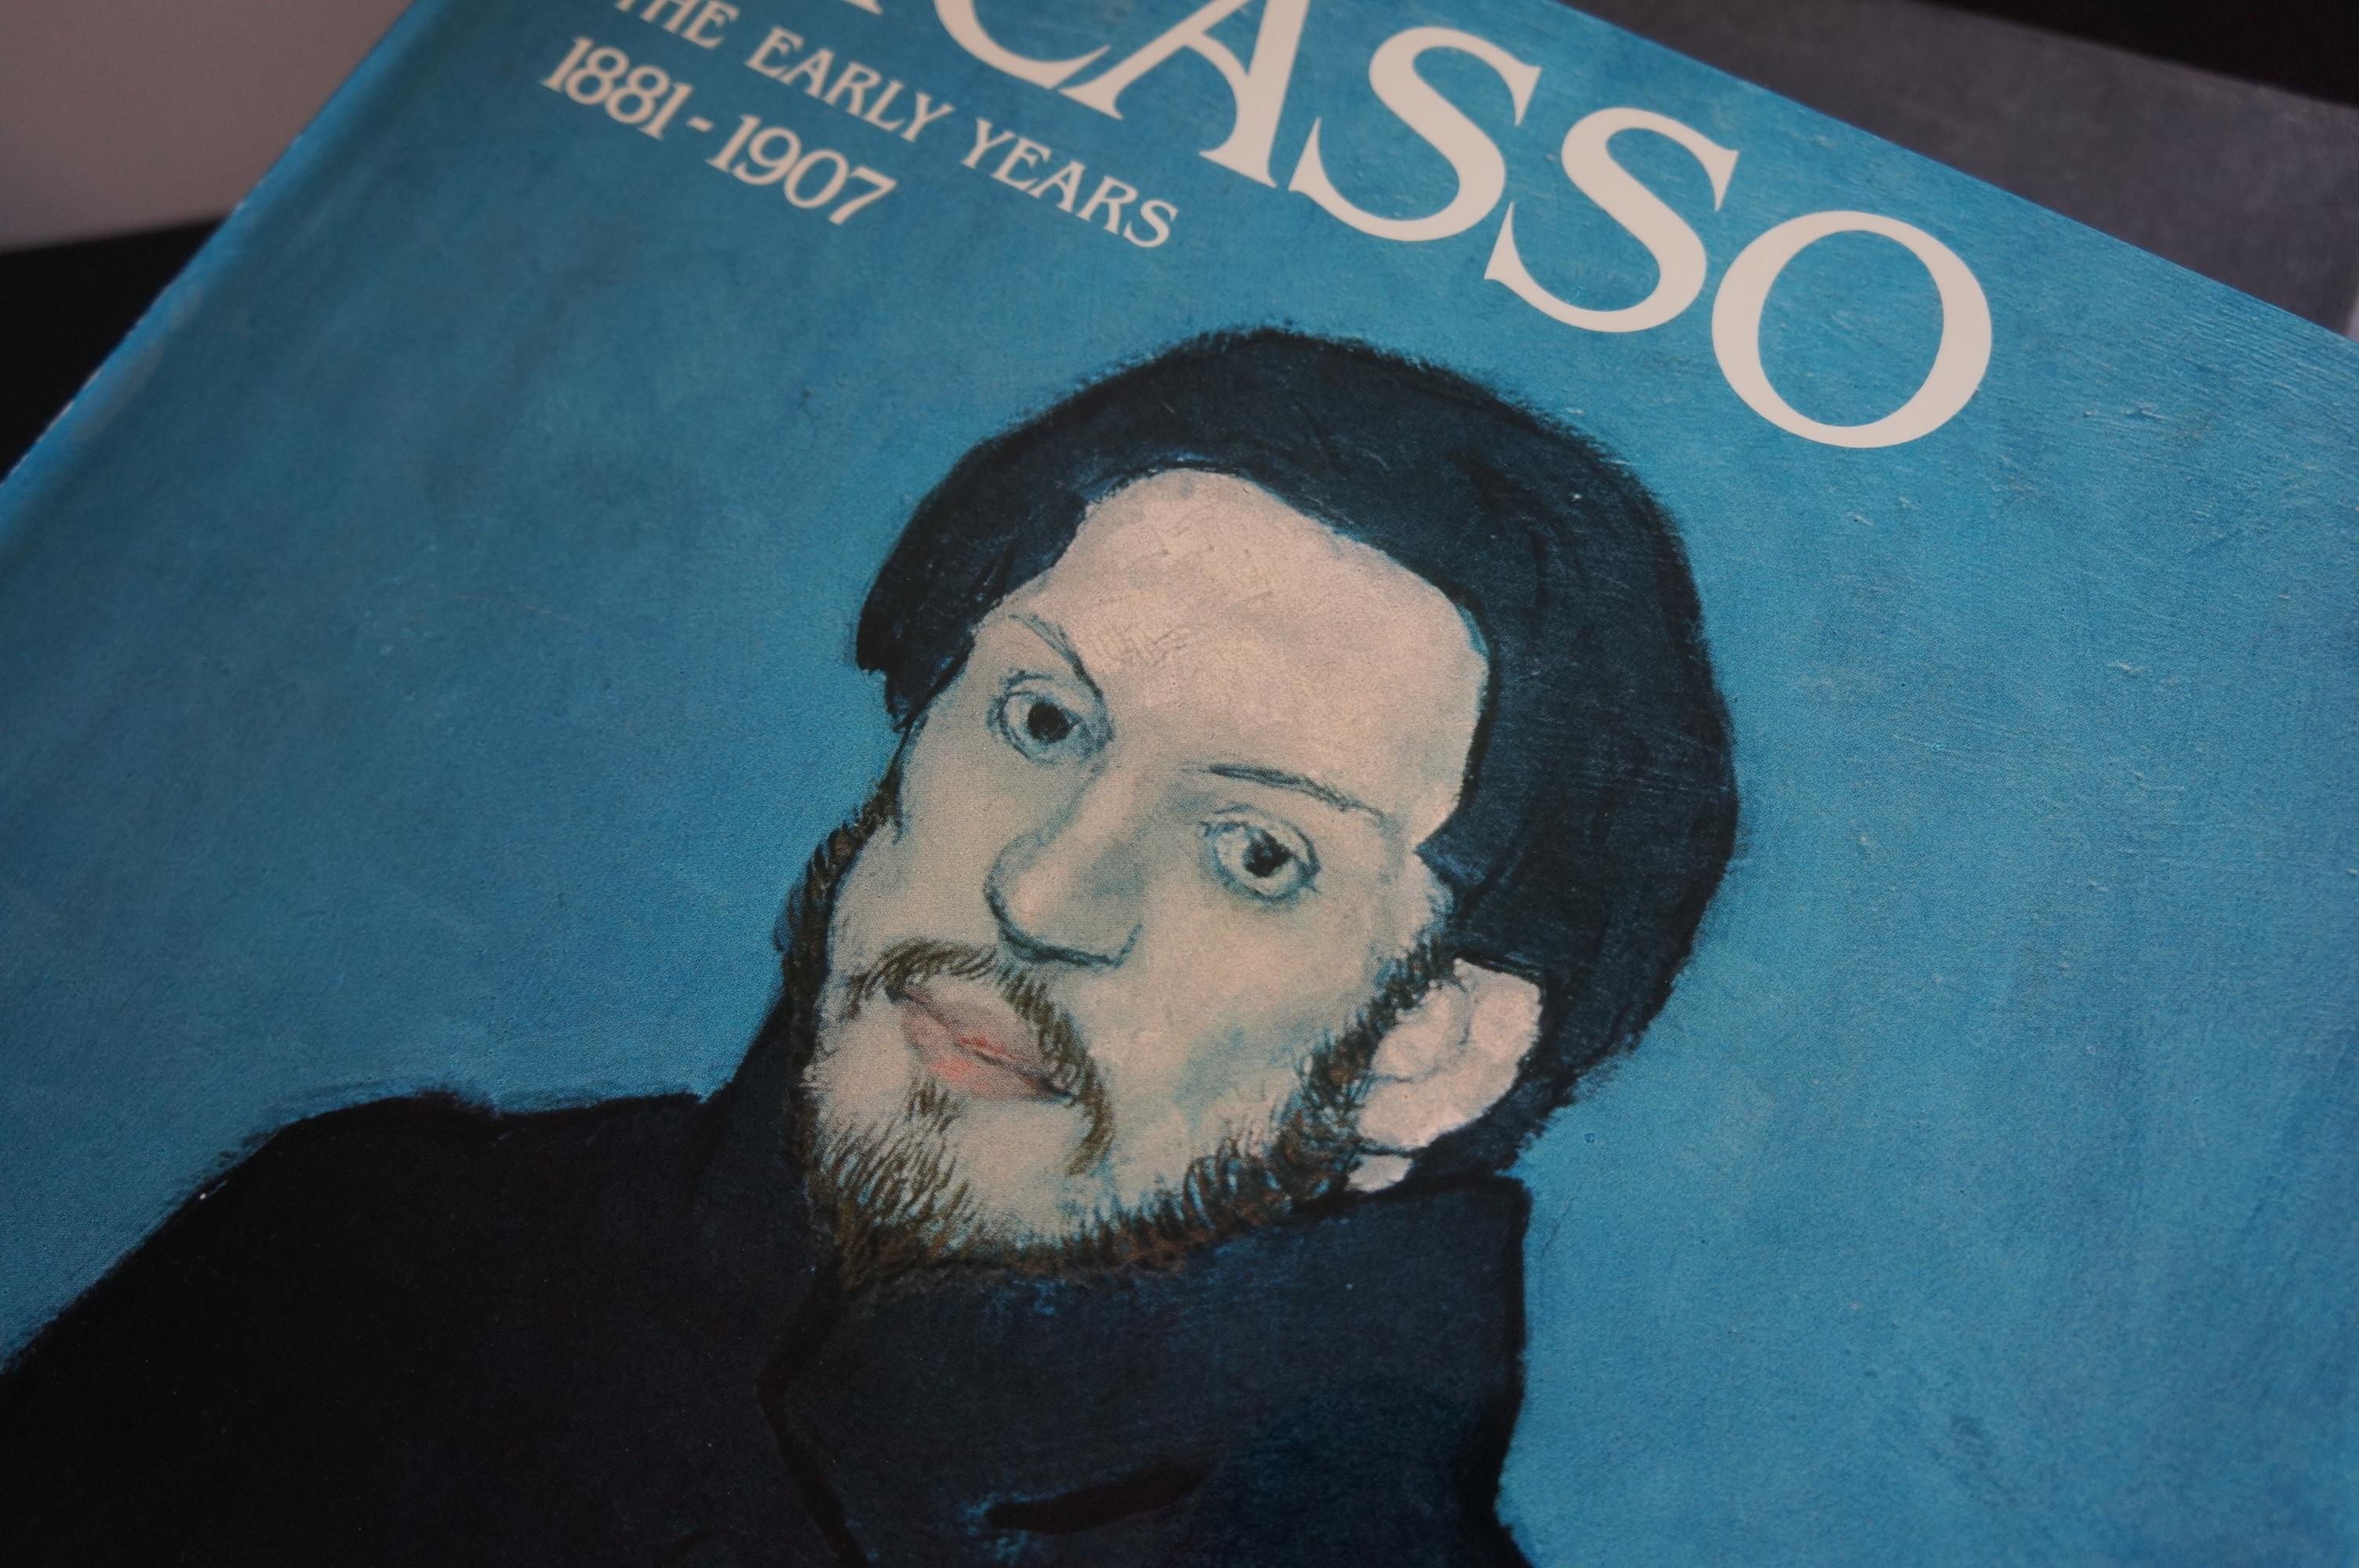 American ‘Picasso The Early Years 1881-1907’ Hardcover Art Book by Palau i Fabre  For Sale